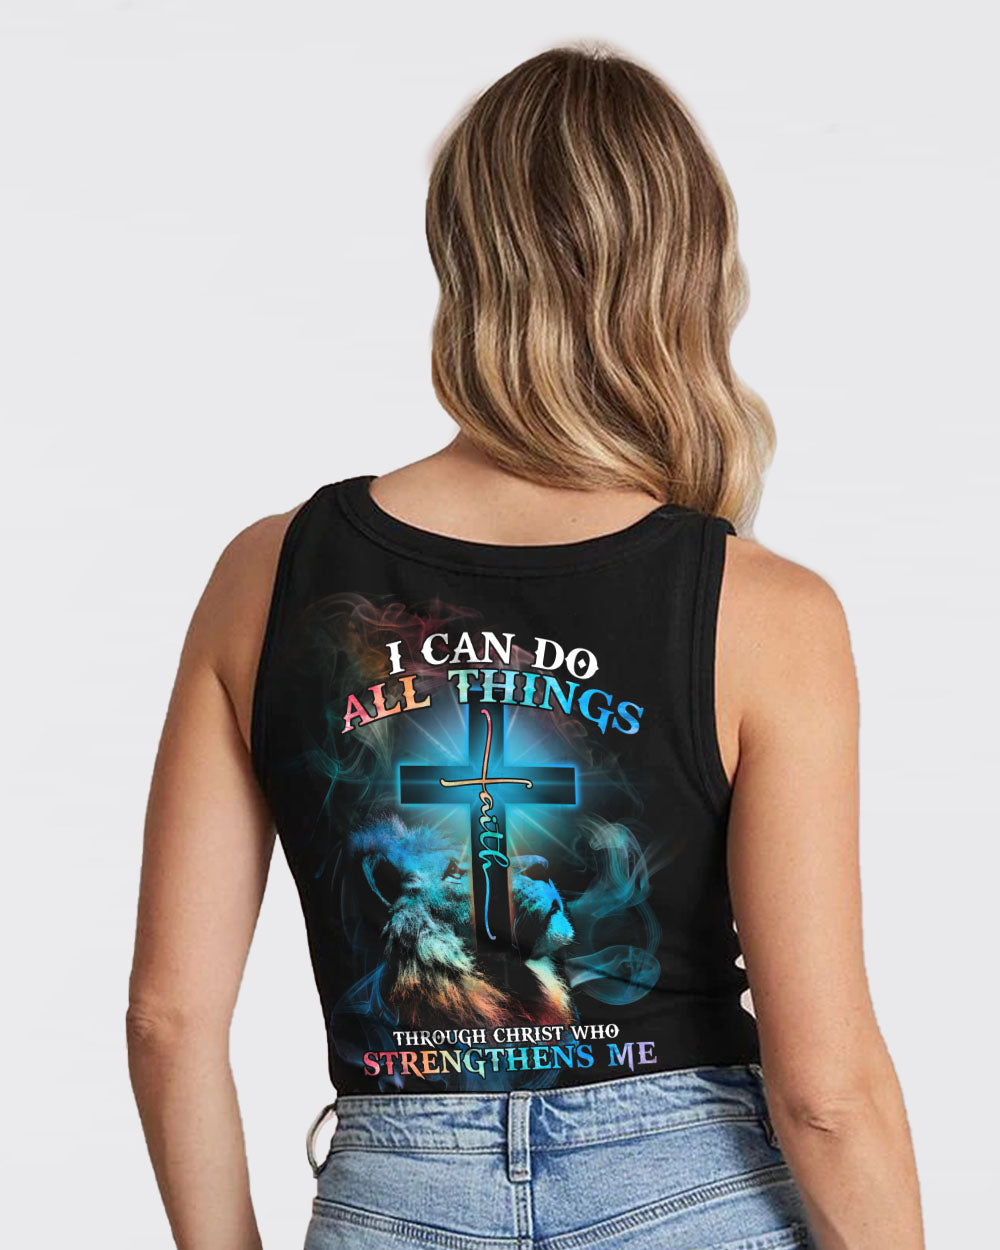 I Can Do All Things Lion Cross Colorful Women's Christian Tanks